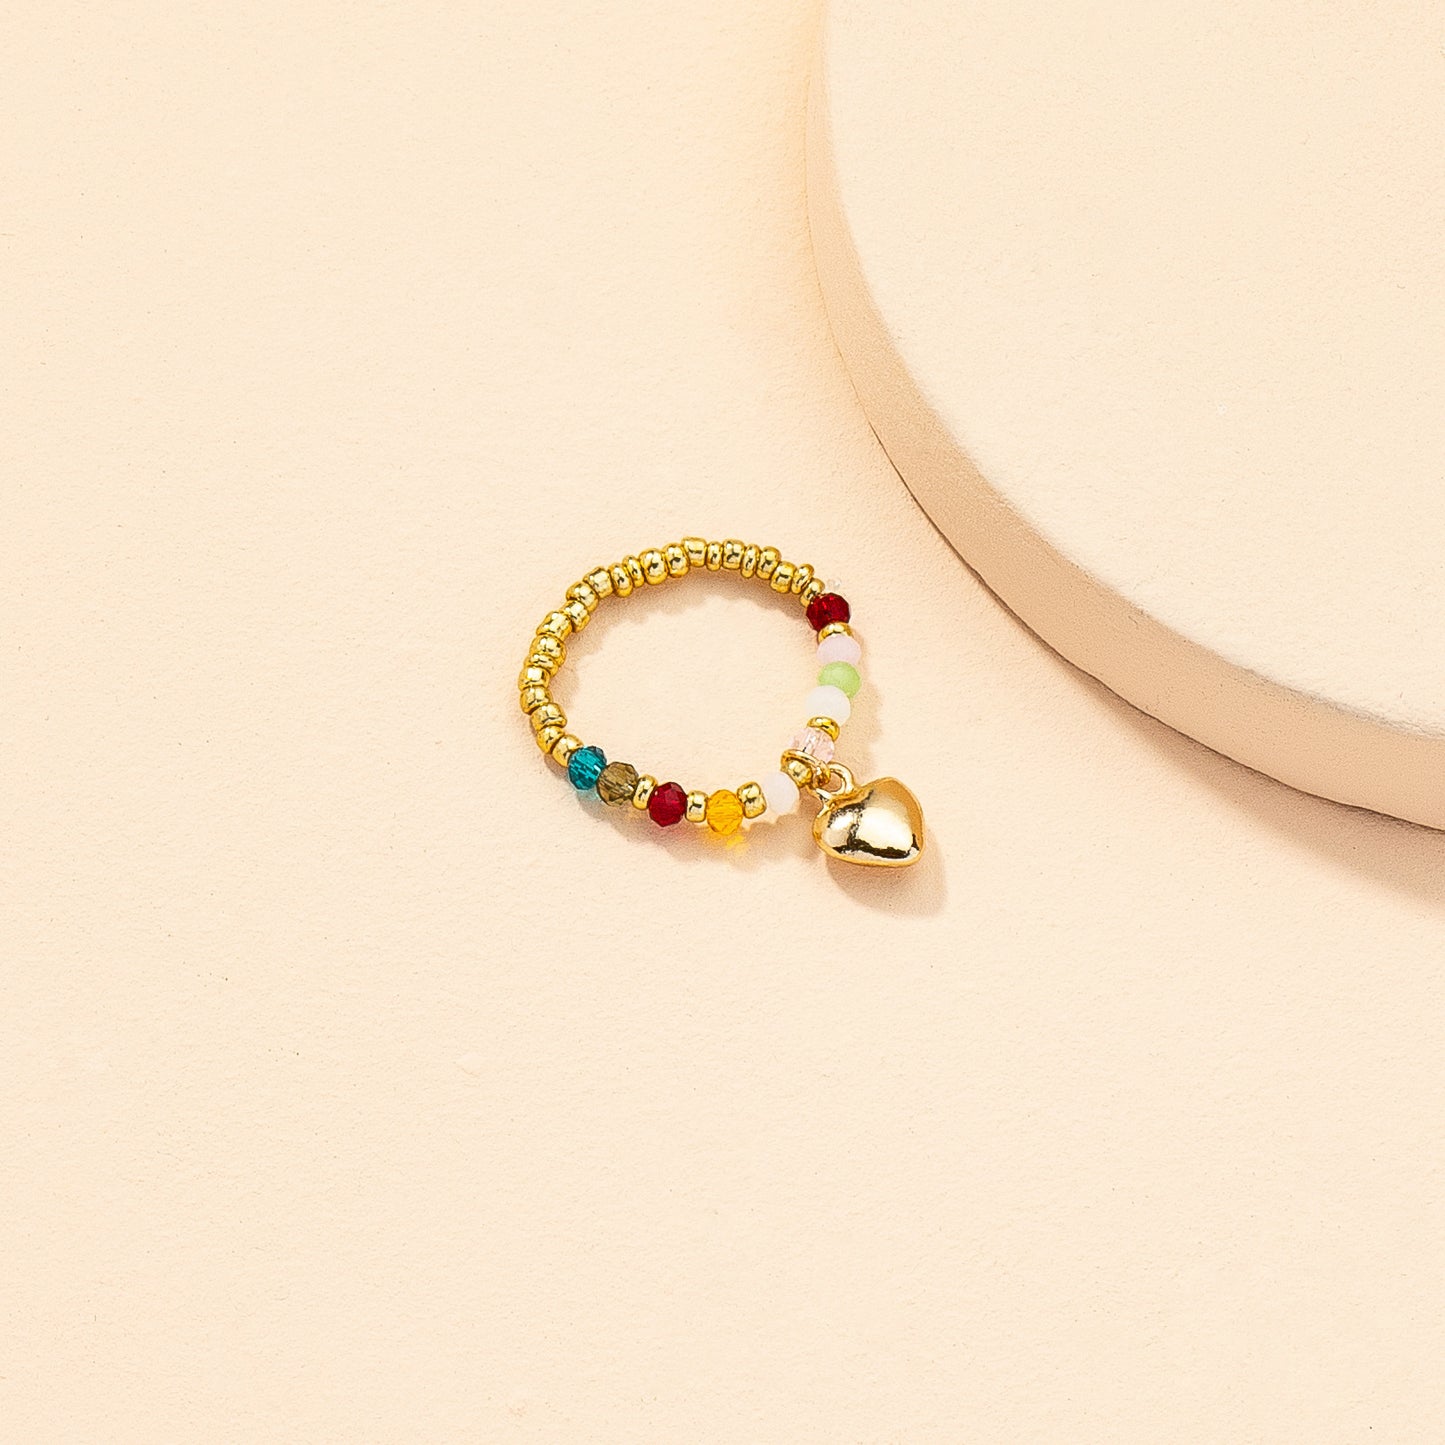 Vienna Verve Love Ring: Stylish Beaded Jewelry for Fashionable Women